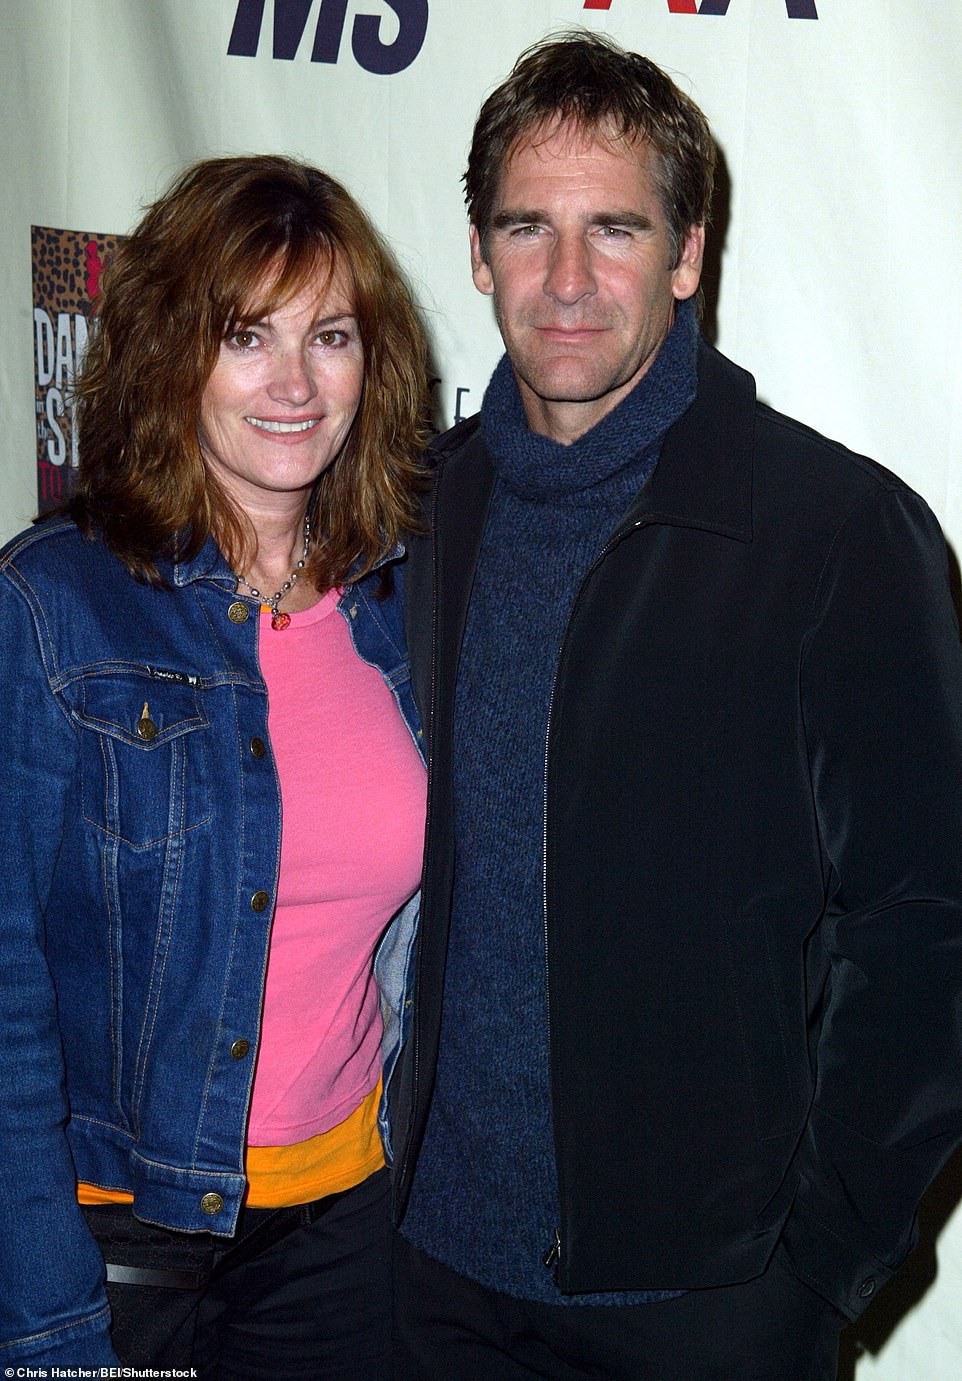 The pair were seen arm in arm at the Race To Erase gala in Los Angeles in May 2003